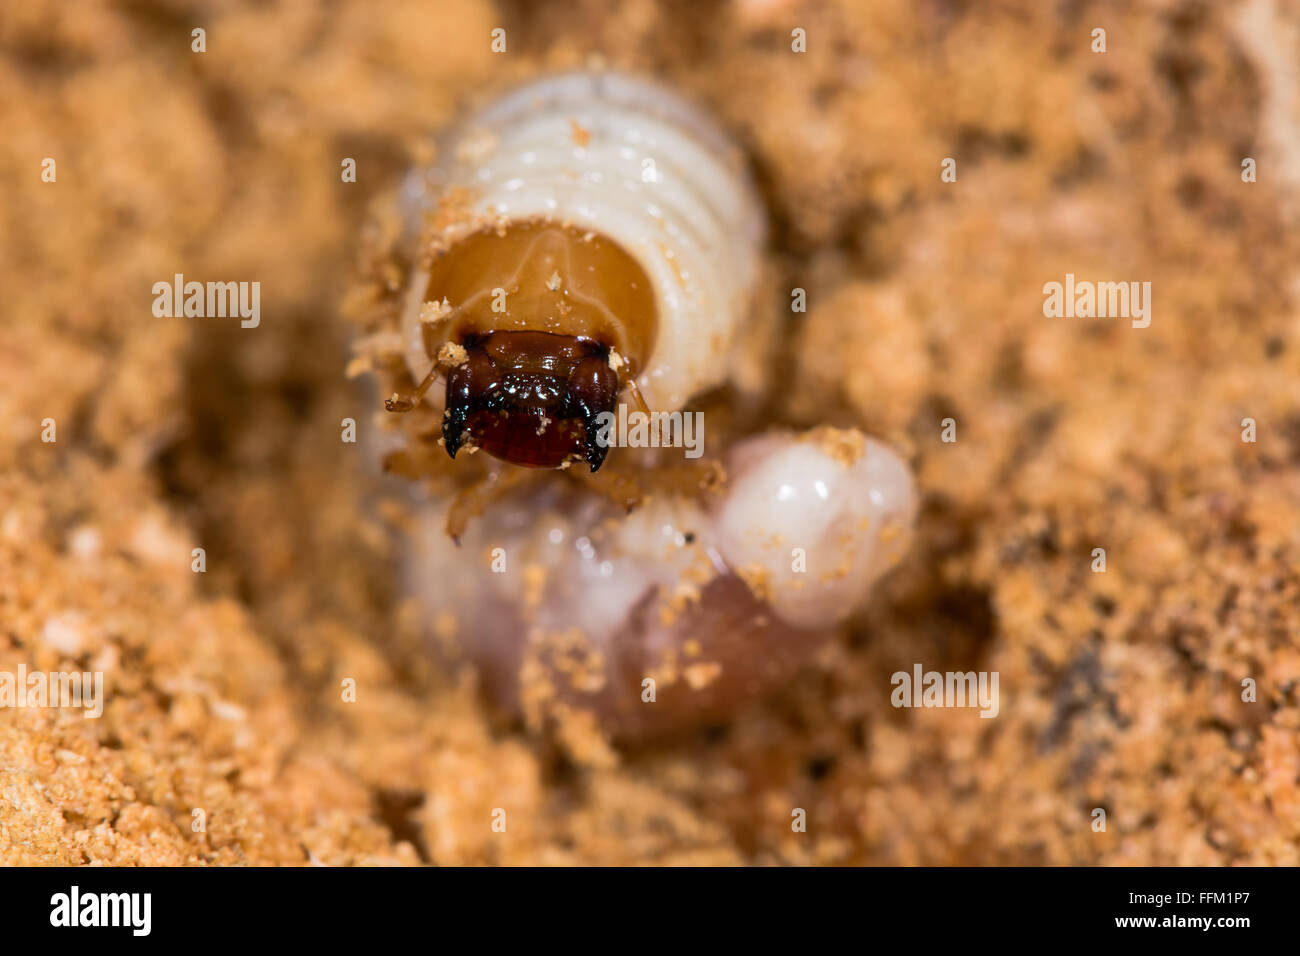 Lesser stag beetle (Dorcus parallelipipedus) larva. An exposed larva showing mandibles on rotting wood, in the family Lucanidae Stock Photo